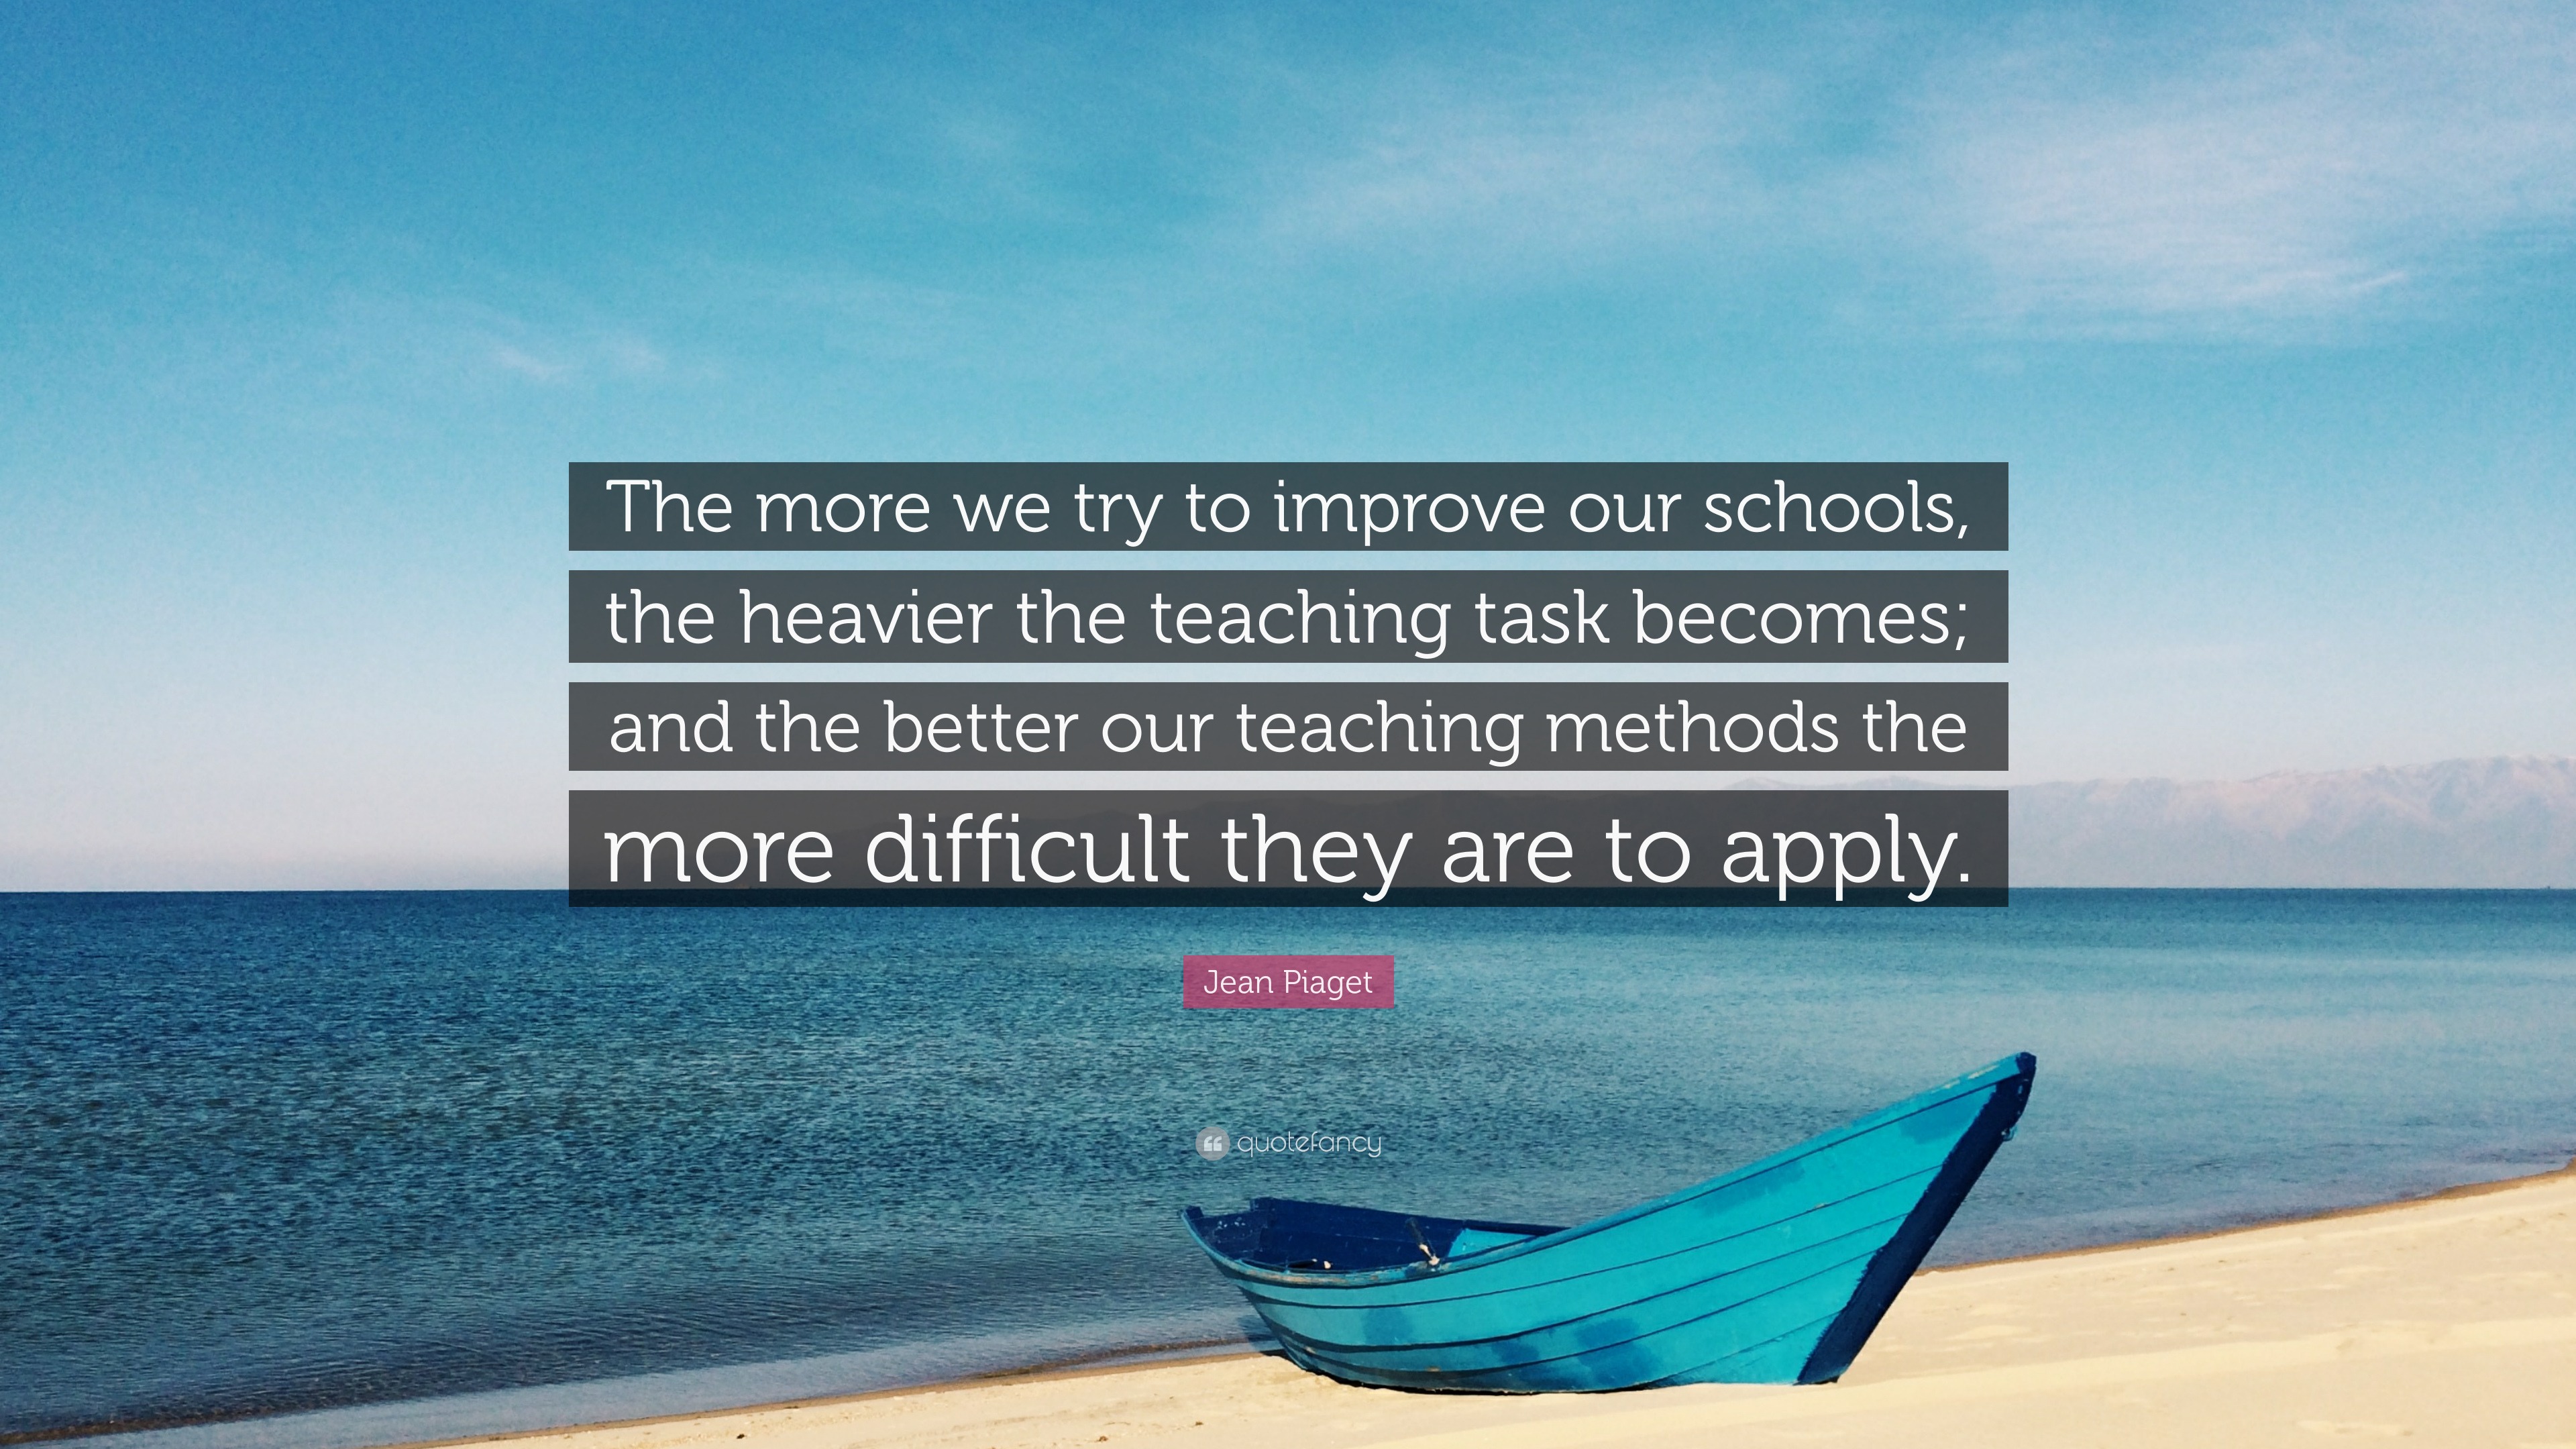 Jean Piaget Quote: “The more we try to improve our schools, the heavier ...